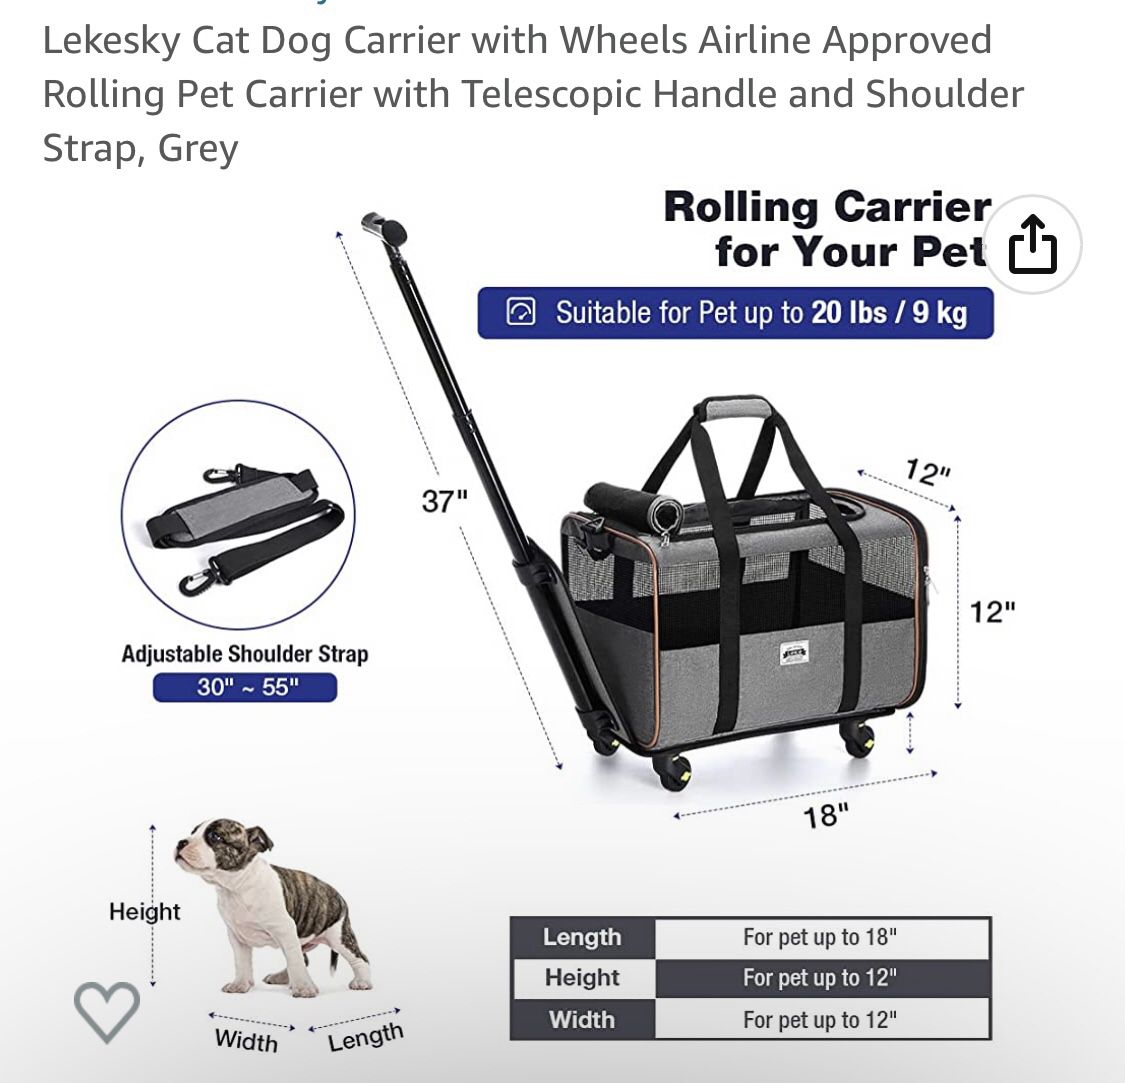 Pet Carrier for dog cats with telescopic walking handle pet traveling bag airline approved